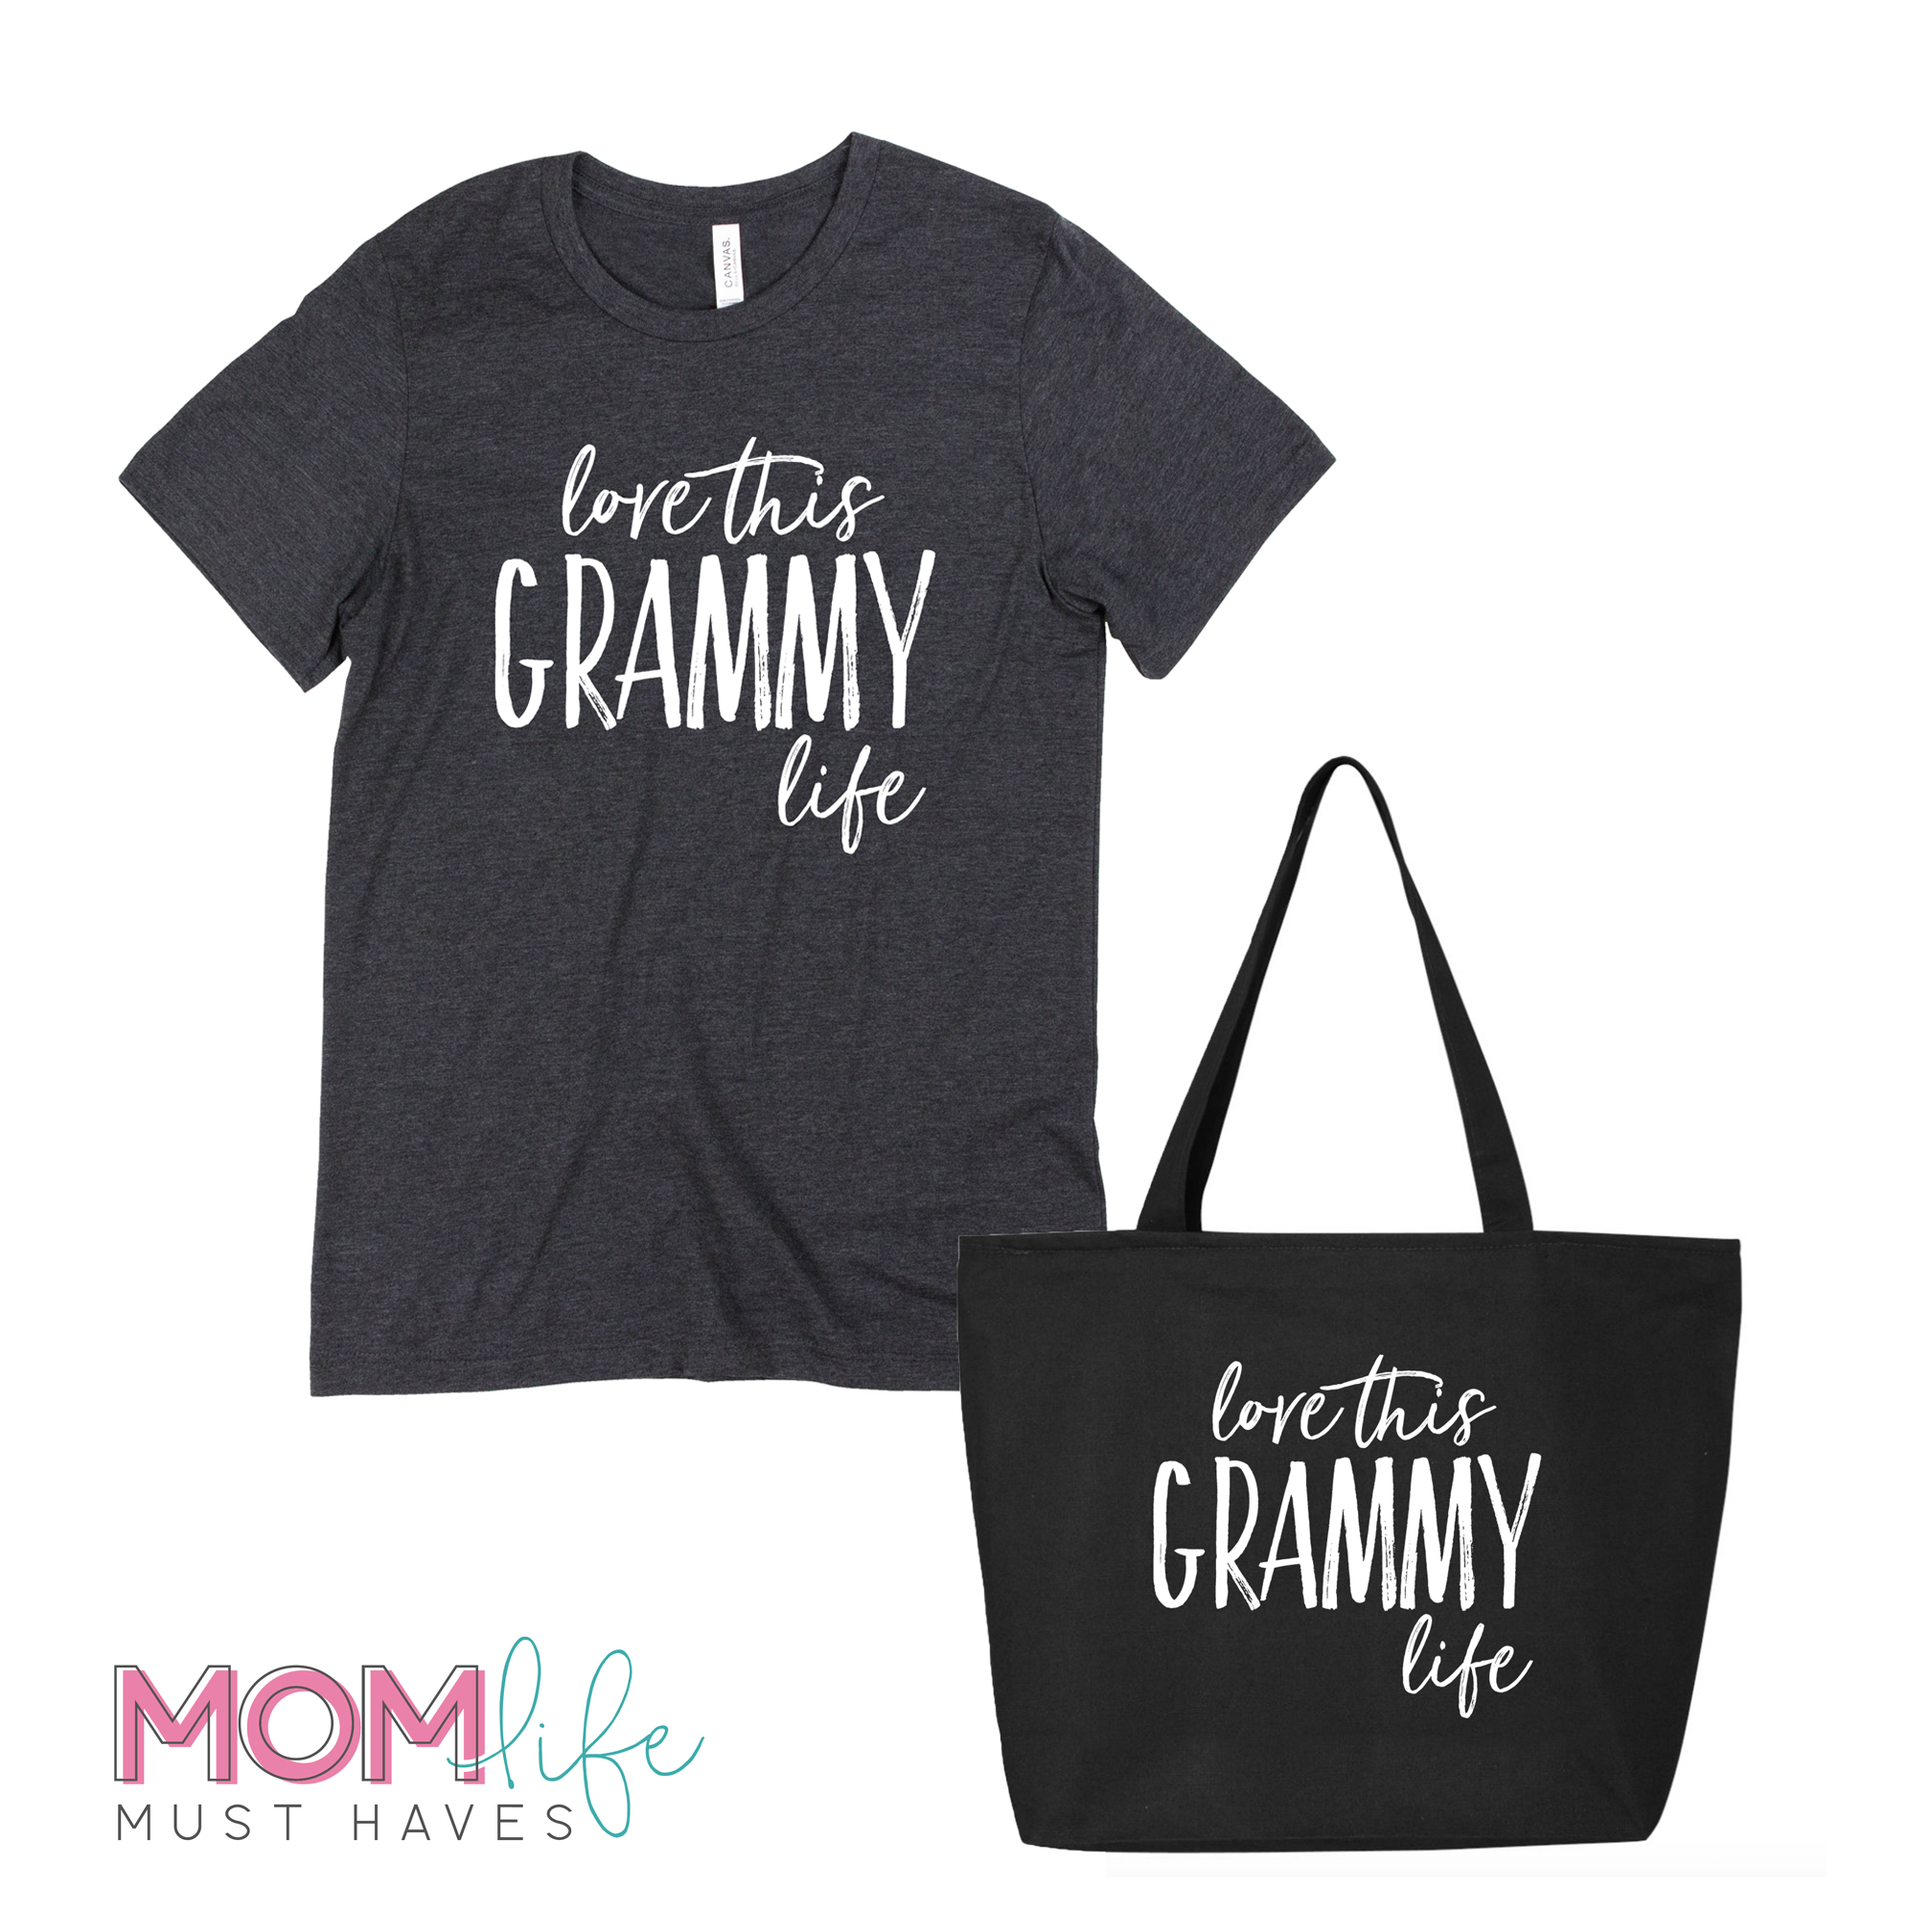 Shop for your favorite mom, grandma, nana and aunt at Mom Life Must Haves! Mother's Day 2018